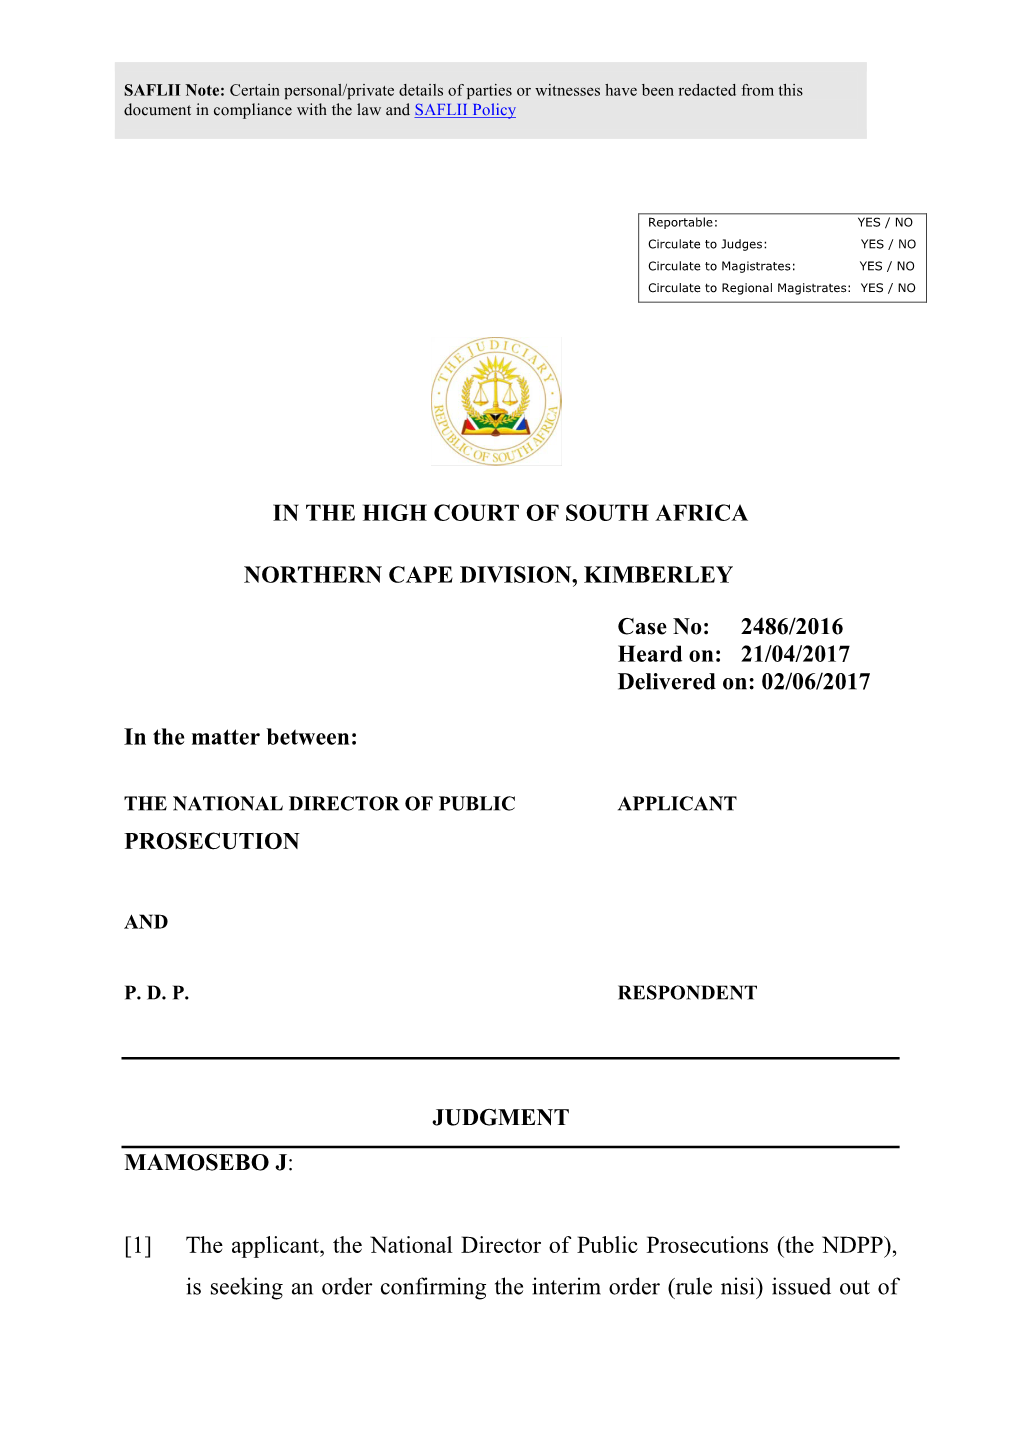 IN the HIGH COURT of SOUTH AFRICA NORTHERN CAPE DIVISION, KIMBERLEY Case No: 2486/2016 Heard On: 21/04/2017 Delivered On: 02/06